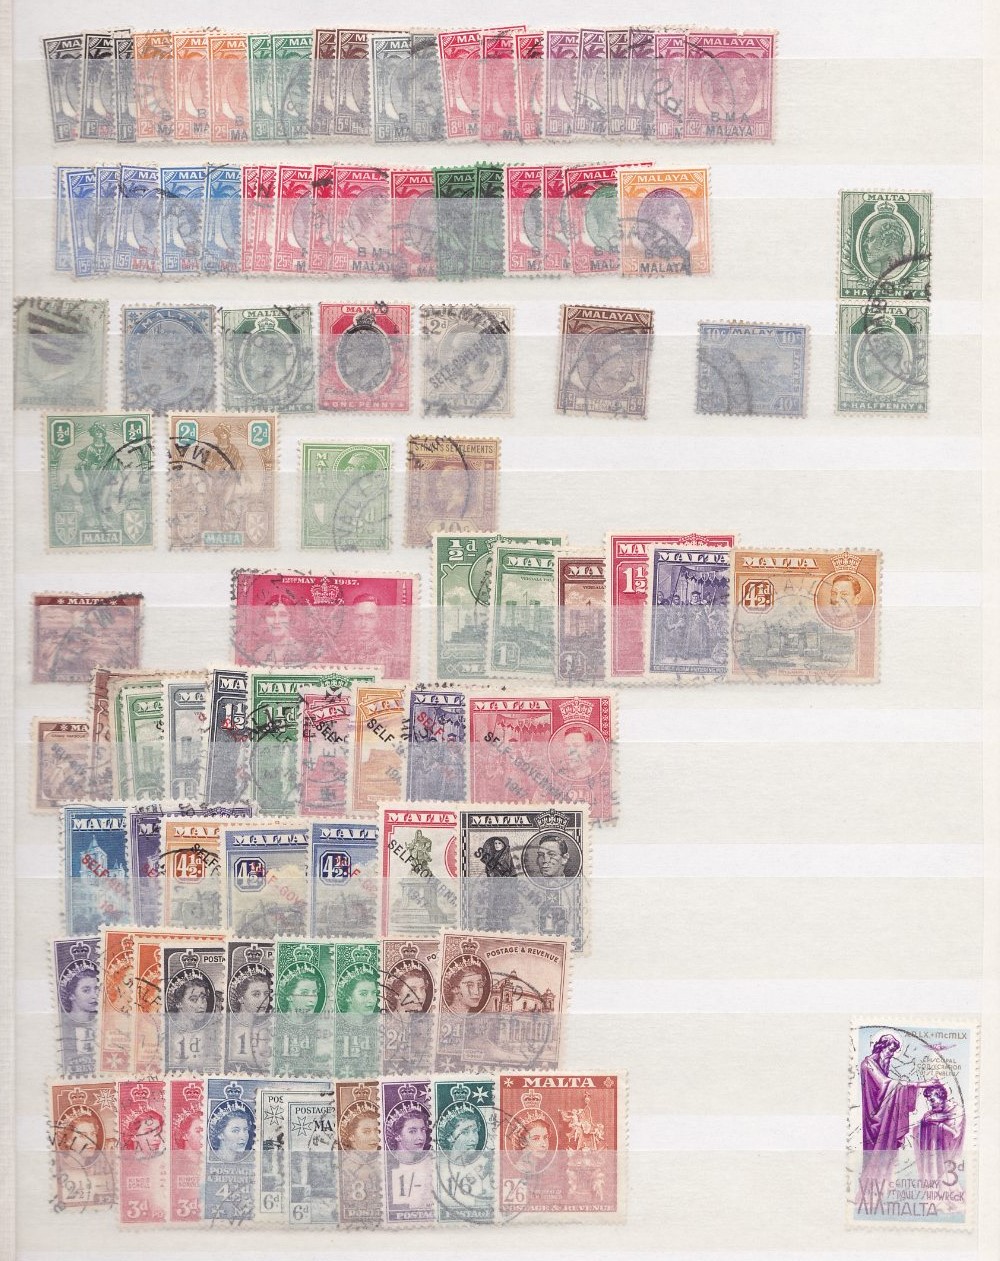 STAMPS : Commonwealth accumulation in stock book, generally good to fine used, values to $5 noted.